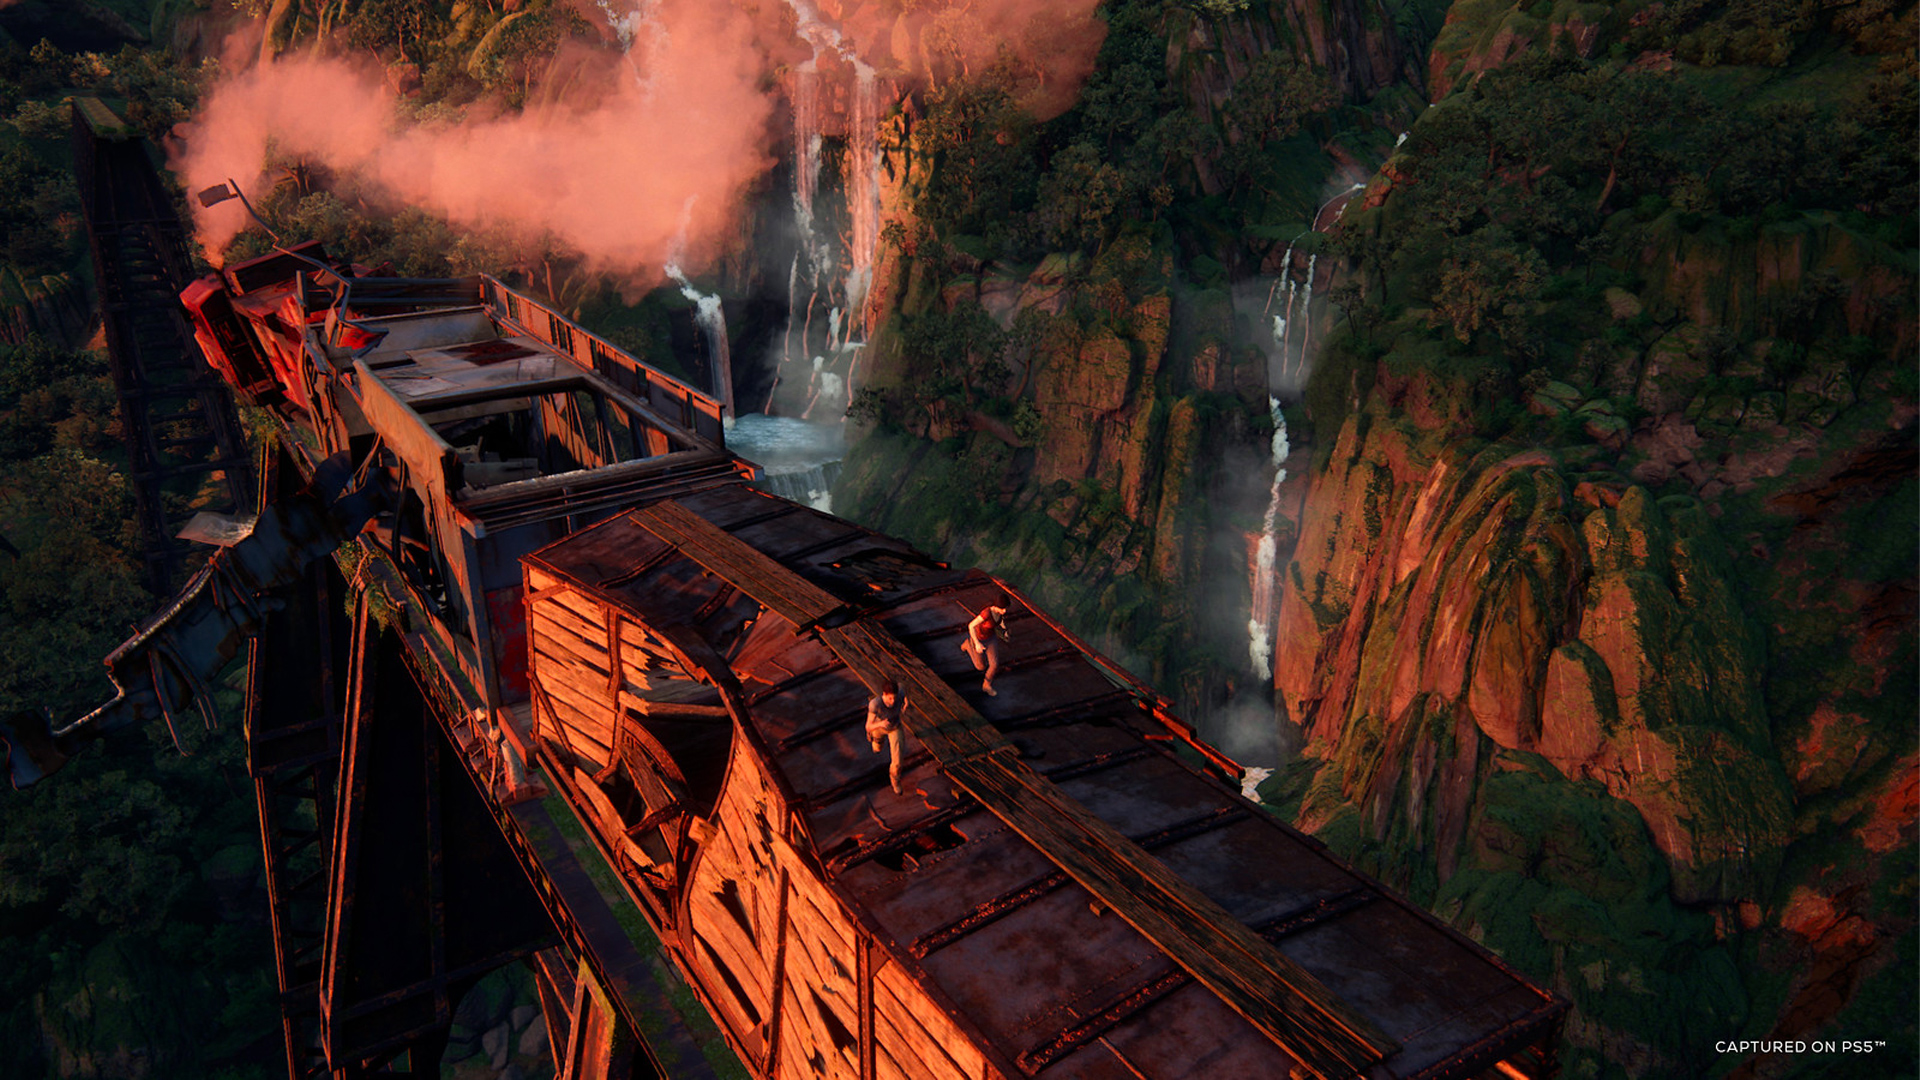 Uncharted: Legacy of Thieves Collection finally has a PC release date